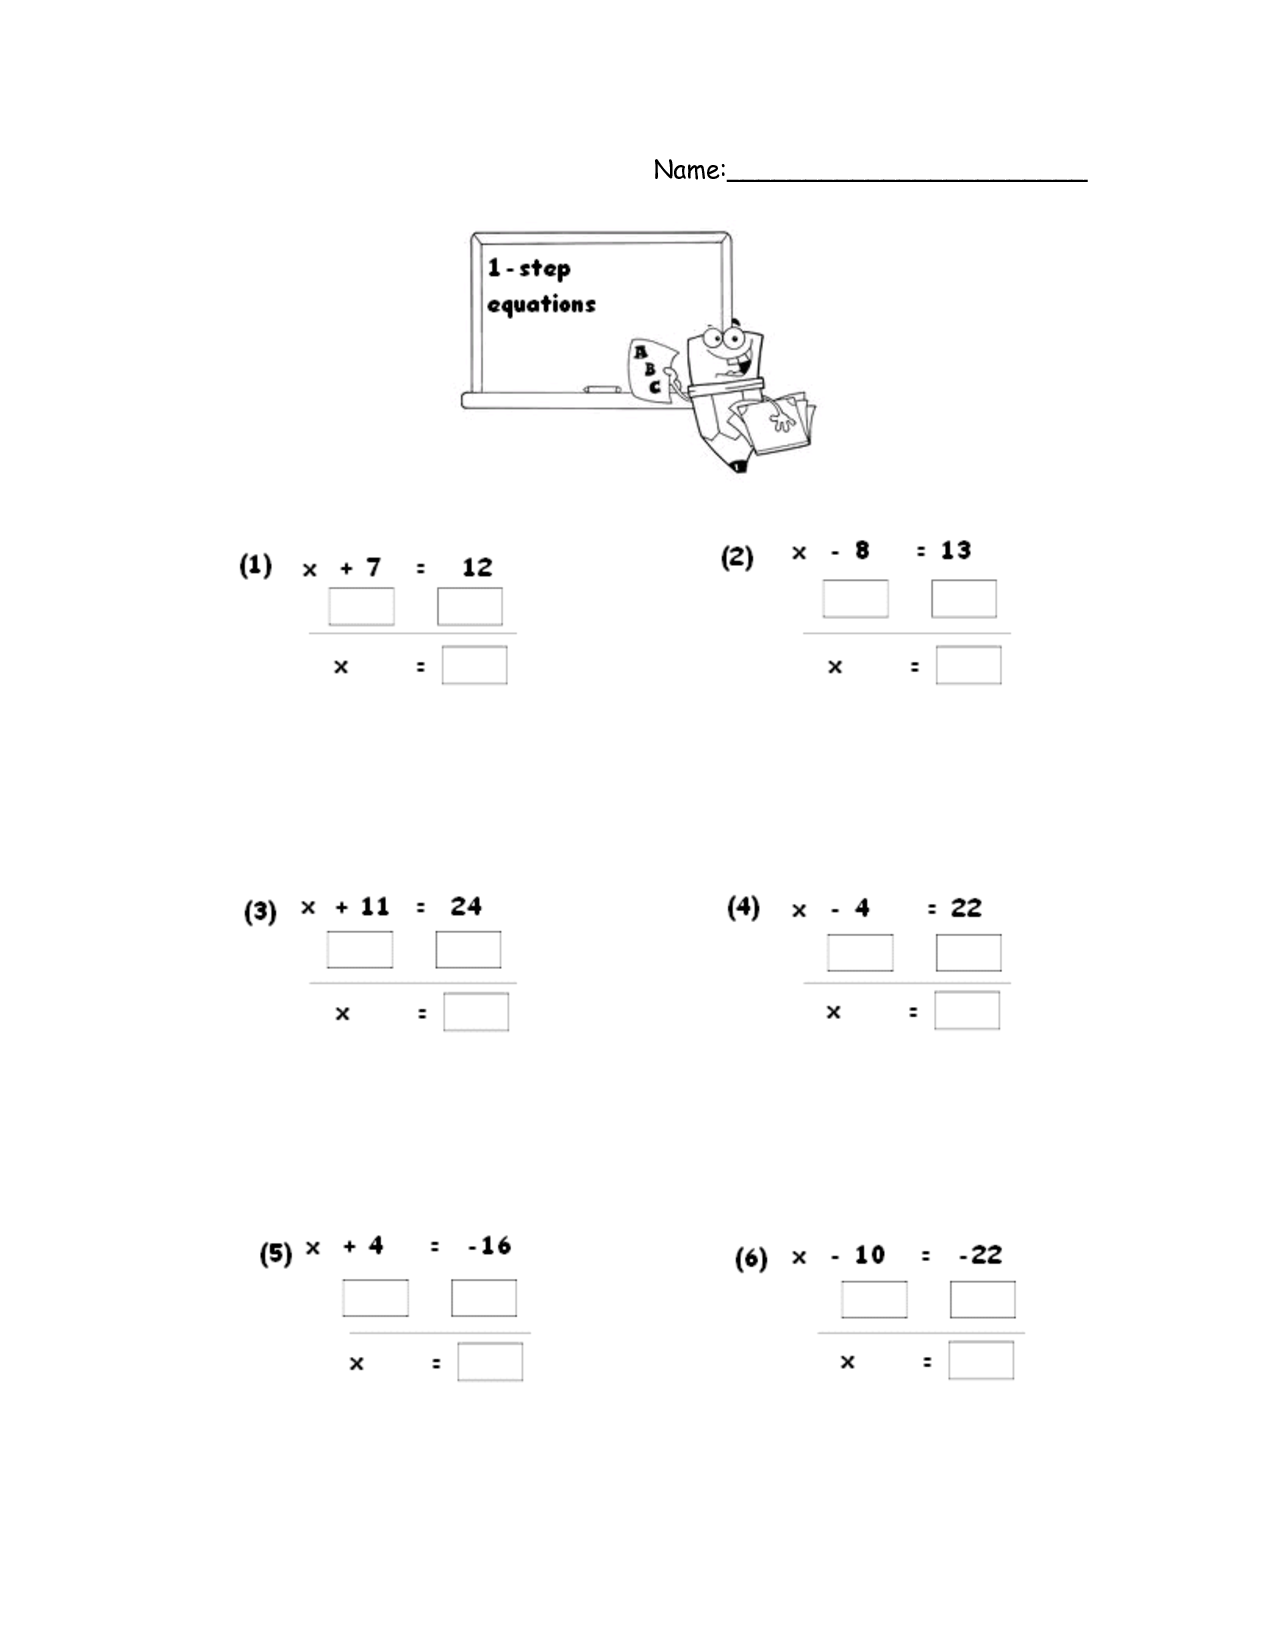 15 Best Images of One Step Equations Worksheets 7th Grade - Math